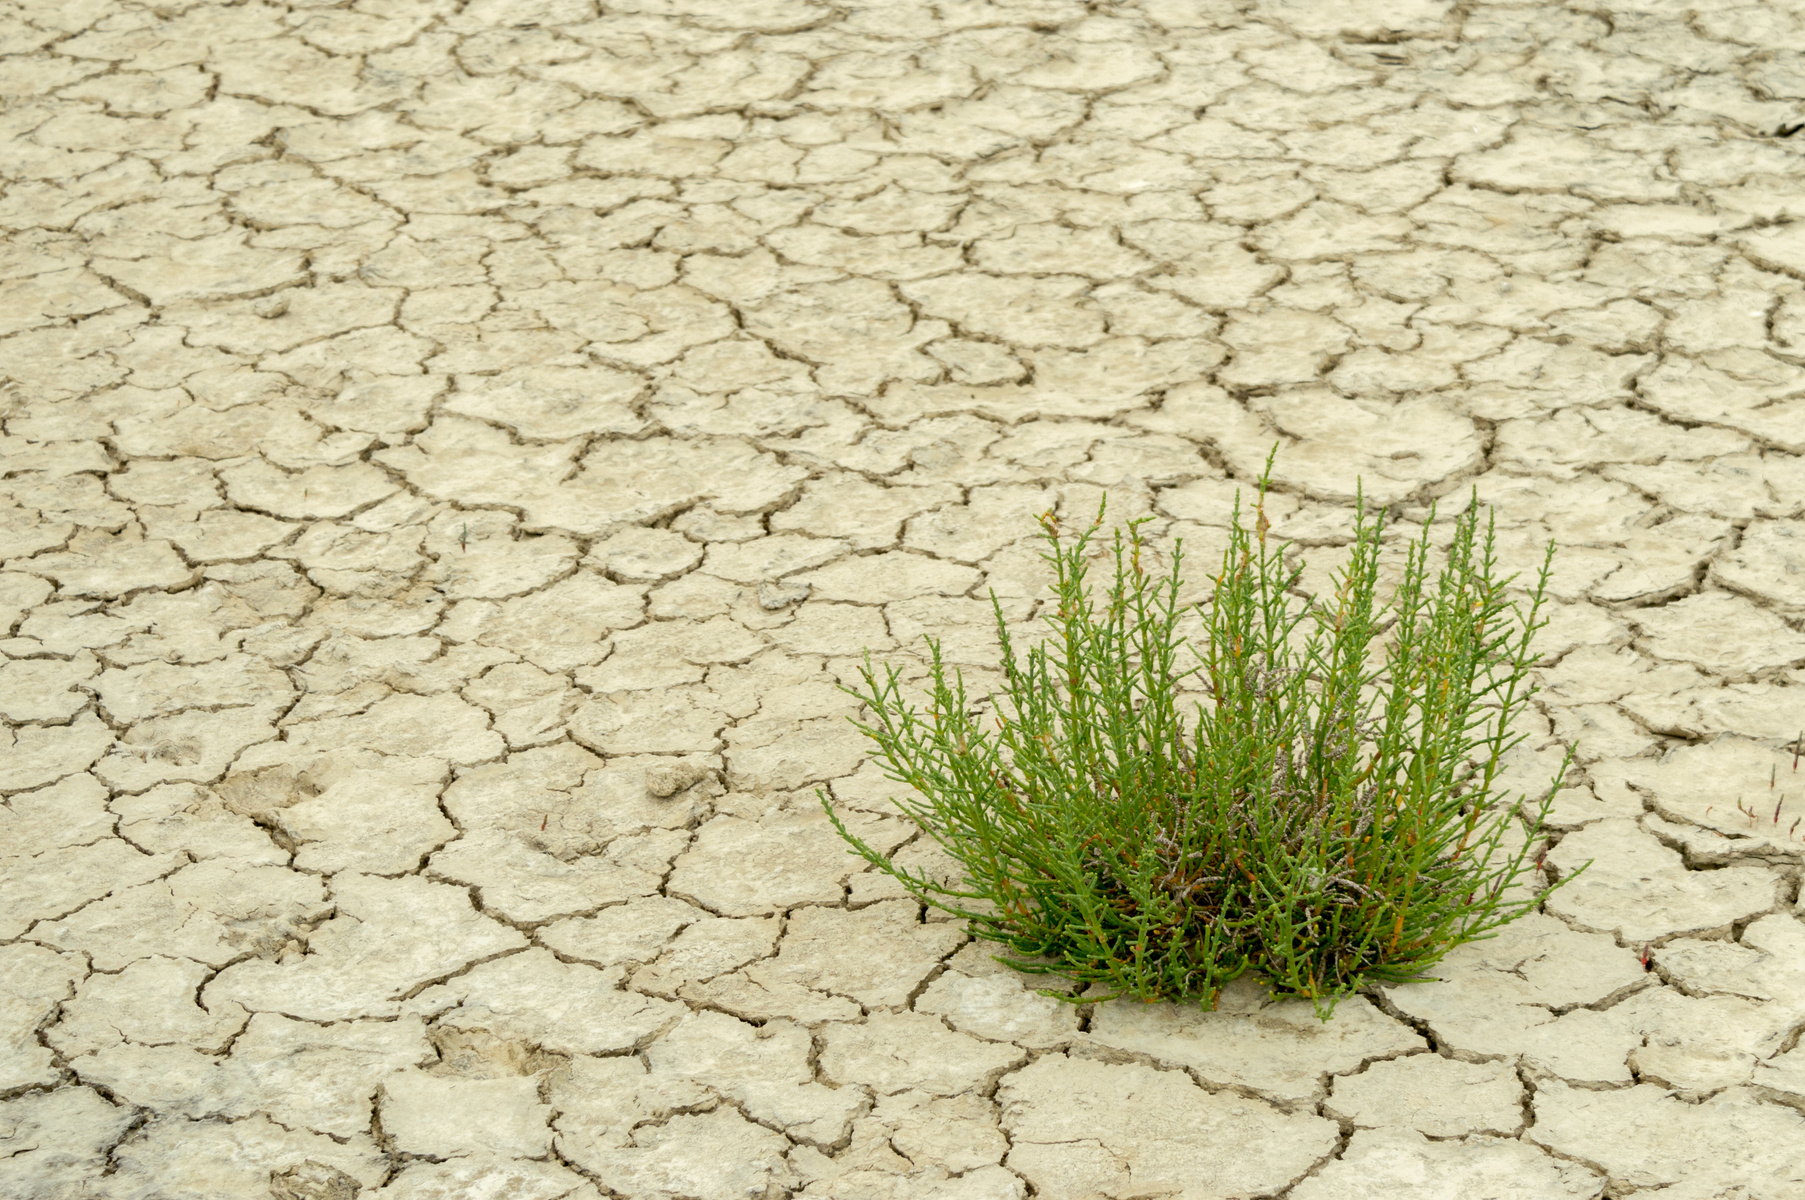 Parched soil with plant adapted to salty conditions